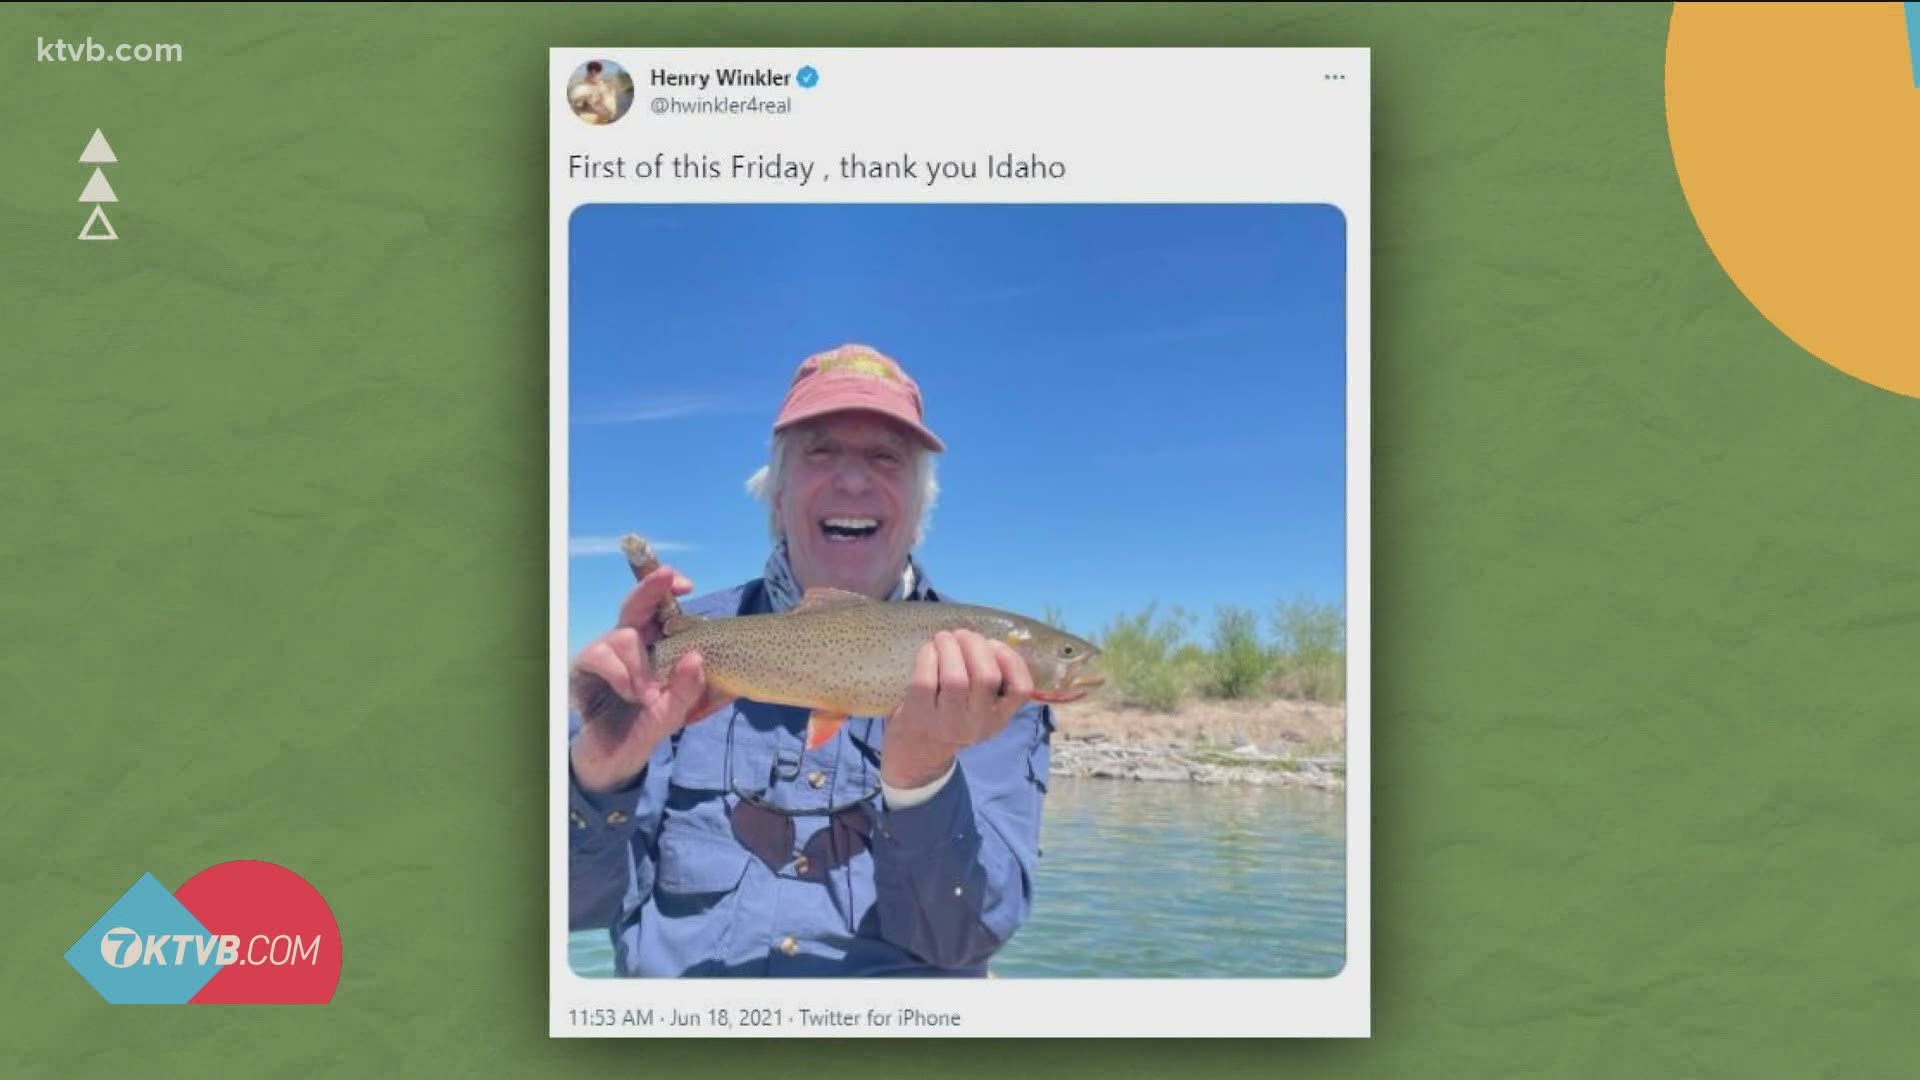 The actor who portrayed Arthur "Fonzie" Fonzarelli in 'Happy Days' and Dr. Saperstein in 'Parks and Rec' shared a photo of him fishing in Idaho's waters on Twitter.